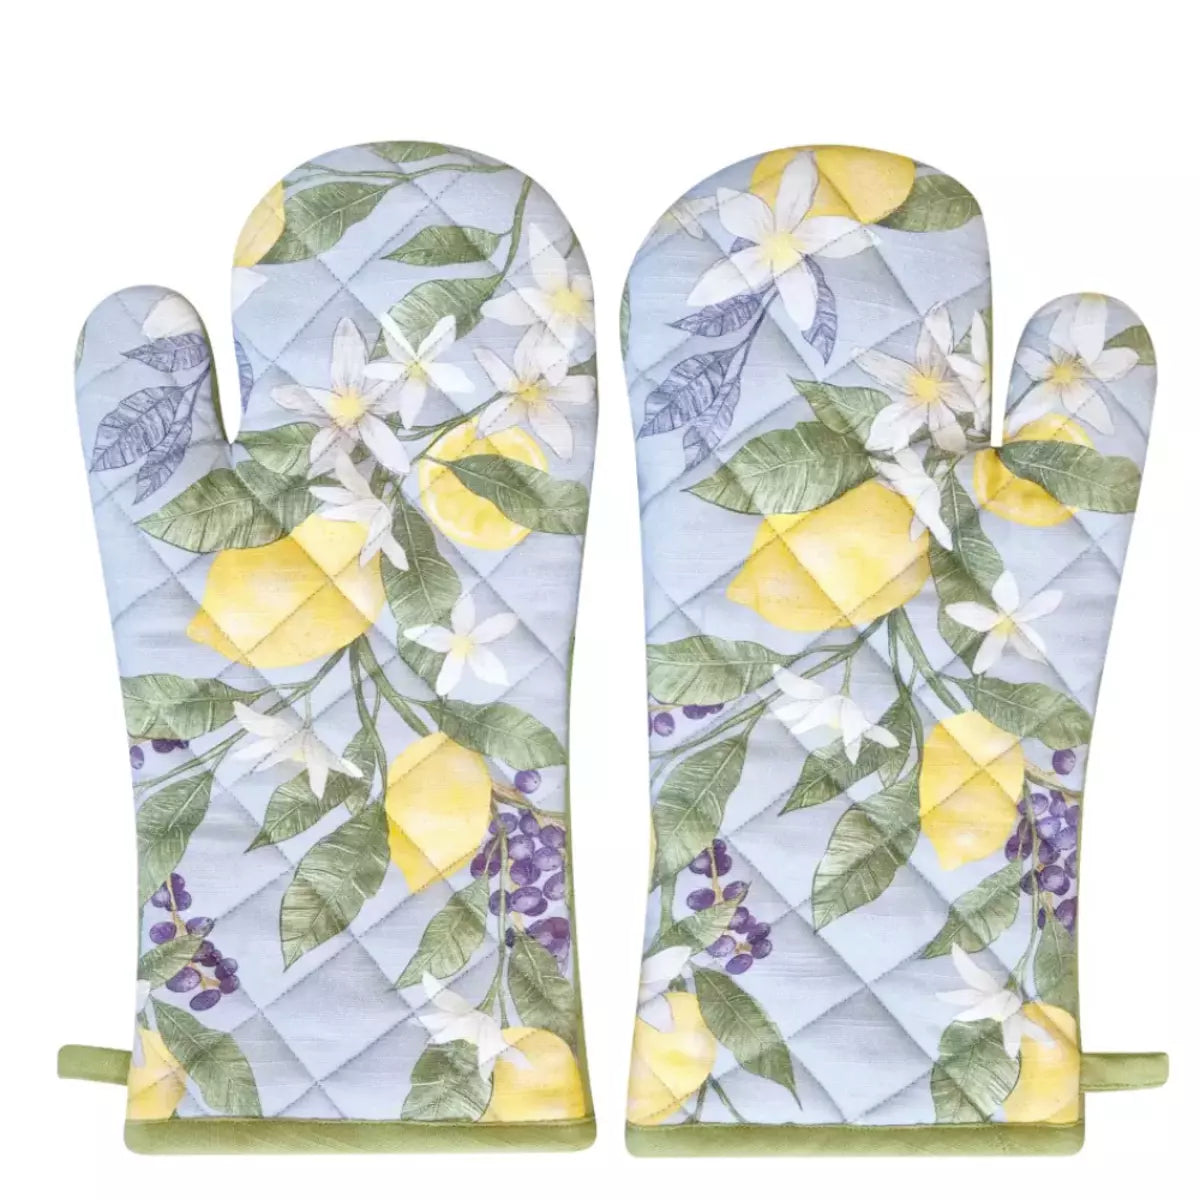 A pair of j.elliot Lemon Oven Mitts made from cotton fabric and featuring a lemon print.